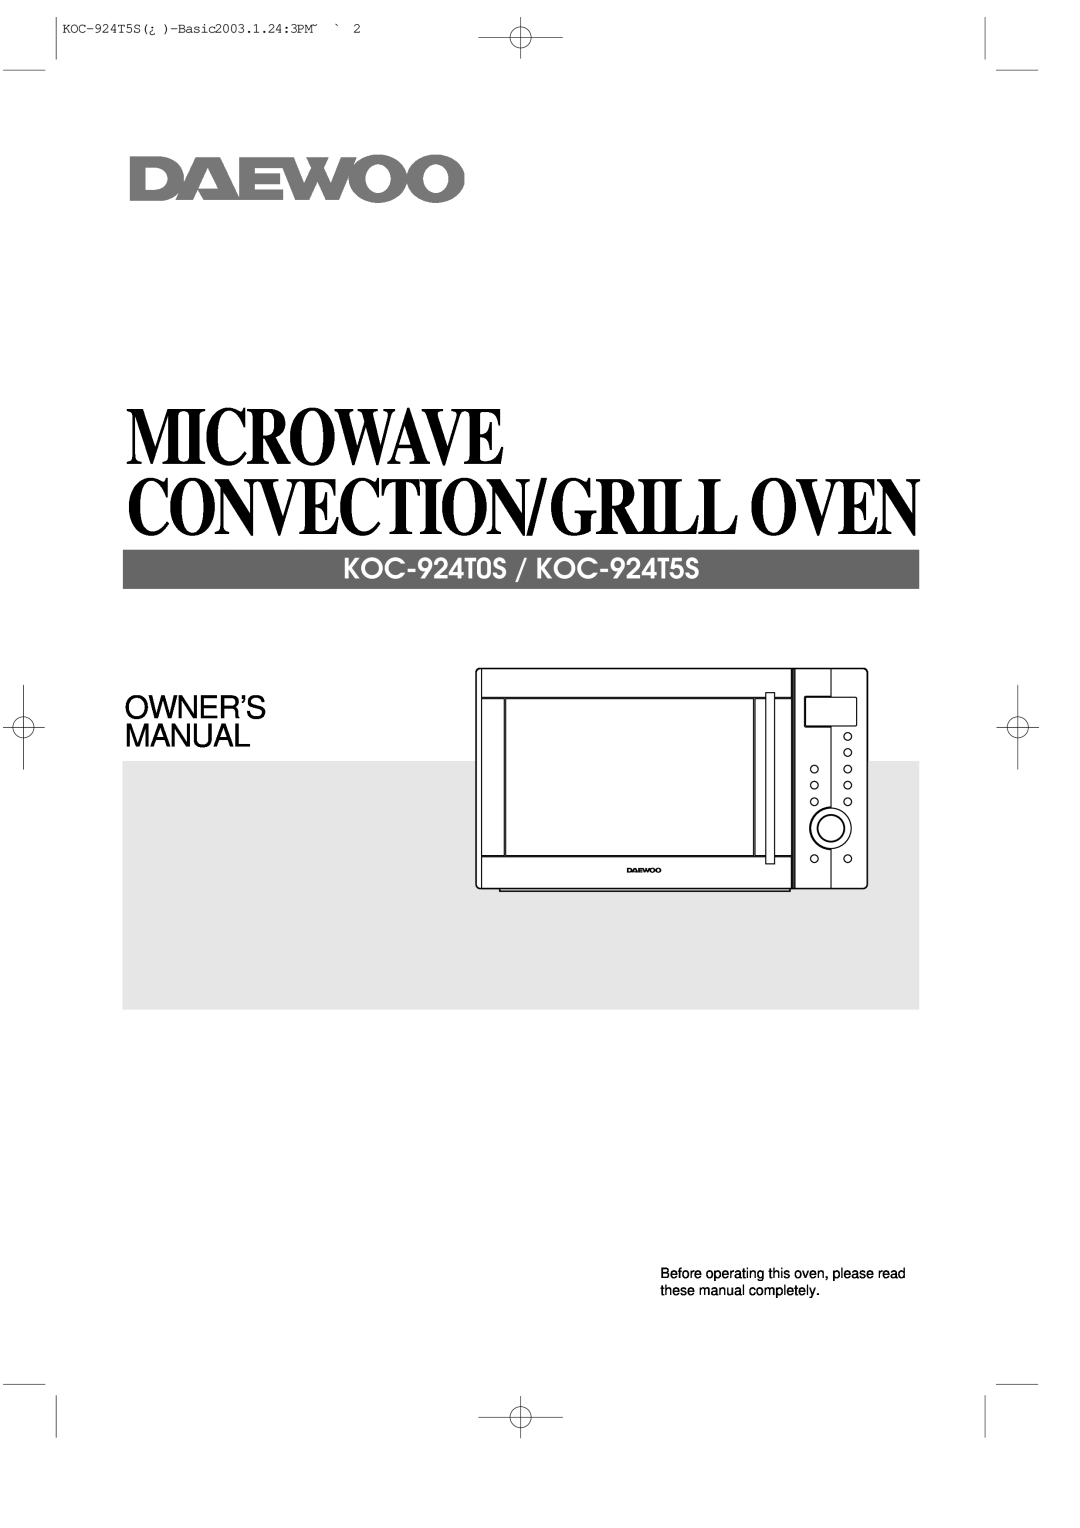 Daewoo owner manual Microwave Convection/Grill Oven, Owner’S Manual, KOC-924T0S / KOC-924T5S 